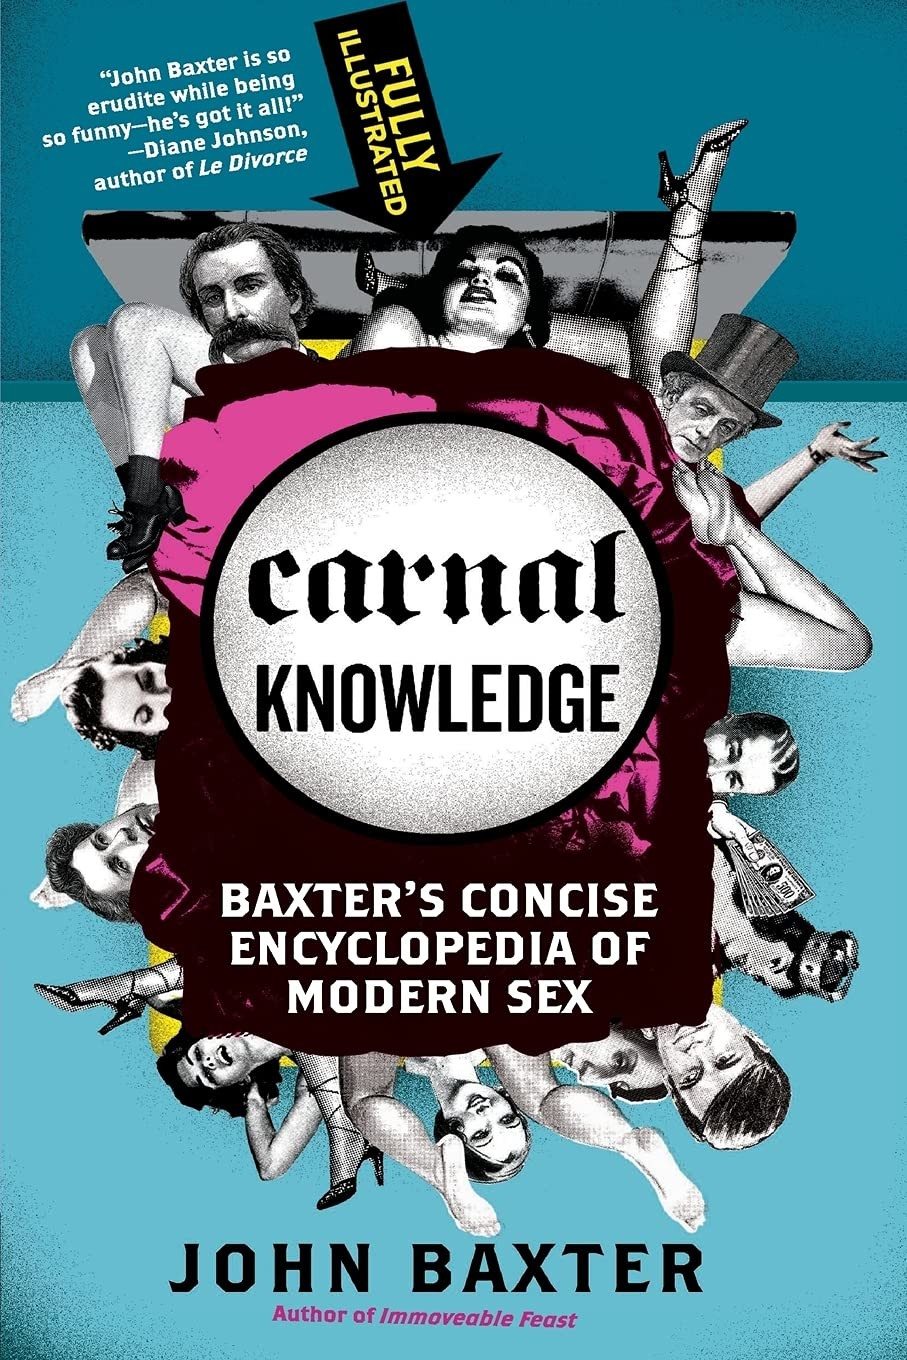 Carnal Knowledge: Baxter's Concise Encyclopedia of Modern Sex